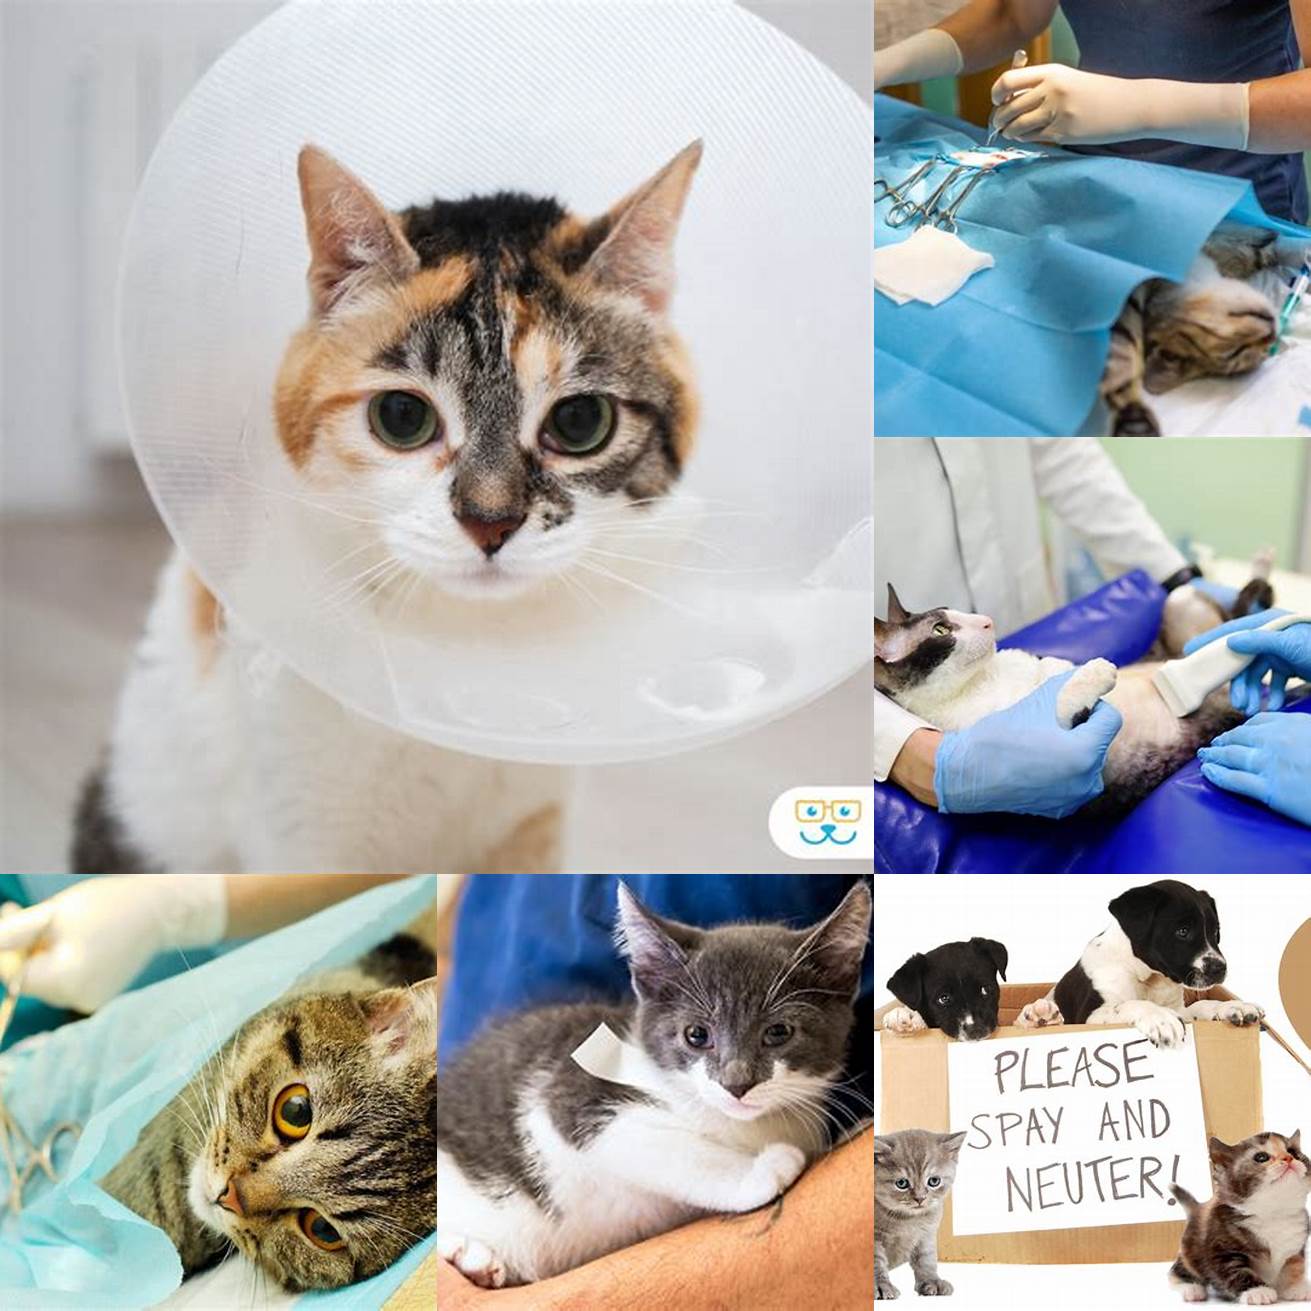 Spay or neuter your cats This can help reduce territorial behavior and aggression